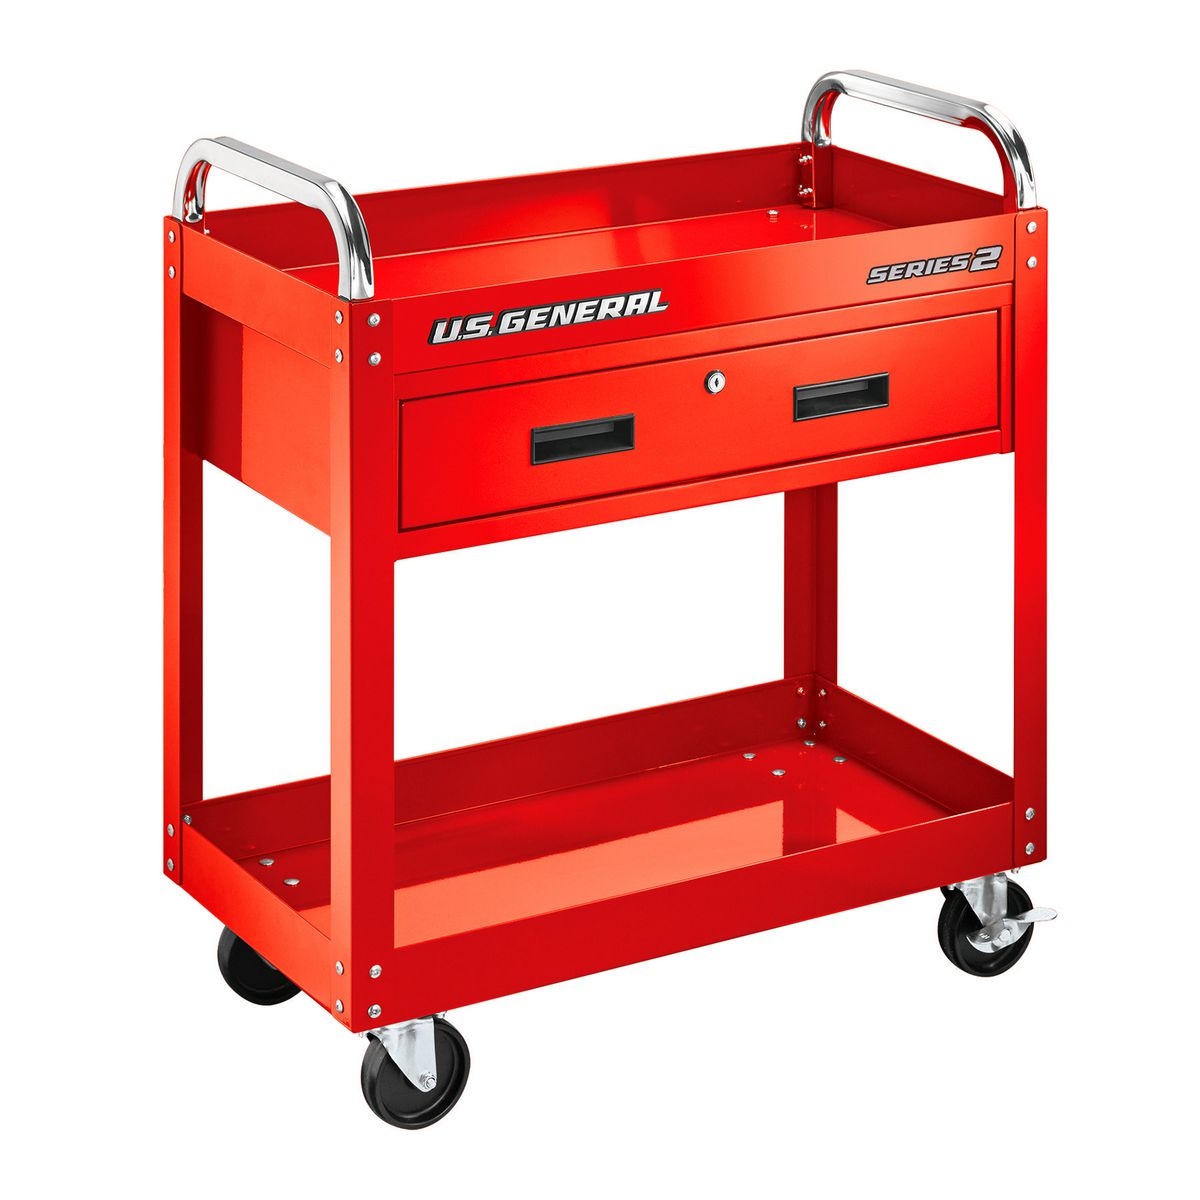 U.S. GENERAL 30 in. Service Cart with Drawer – Red – Item 64058 / 70029